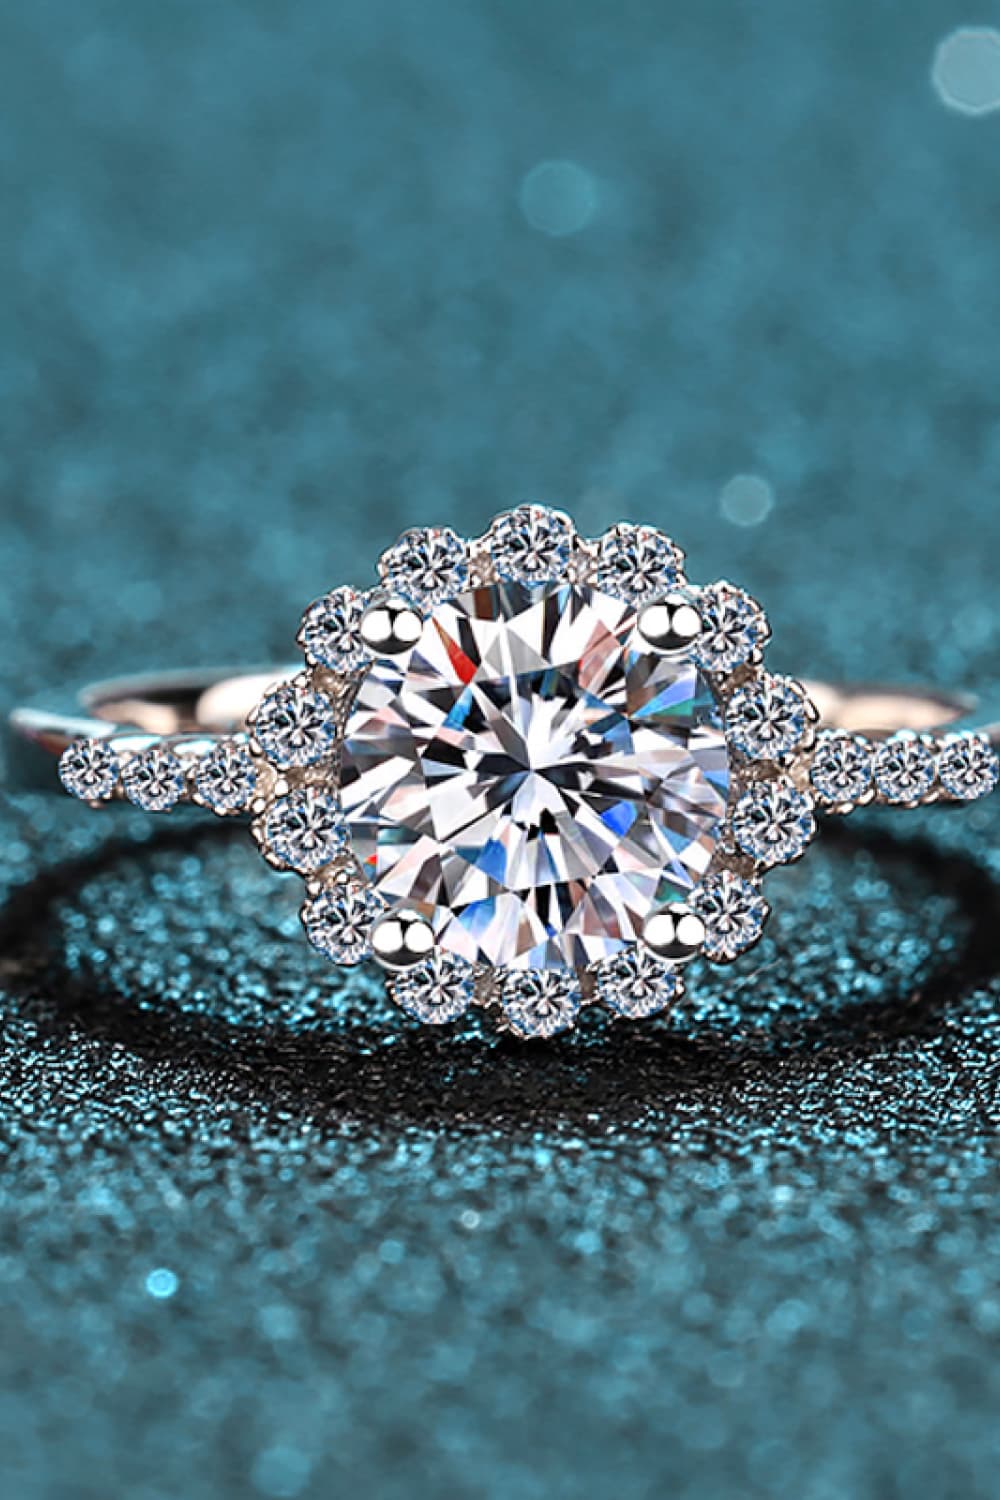 Forever Yours - A Mesmerizing Symbol of Eternal Love - Captivating Moissanite Halo Shines Forever - Guy Christopher